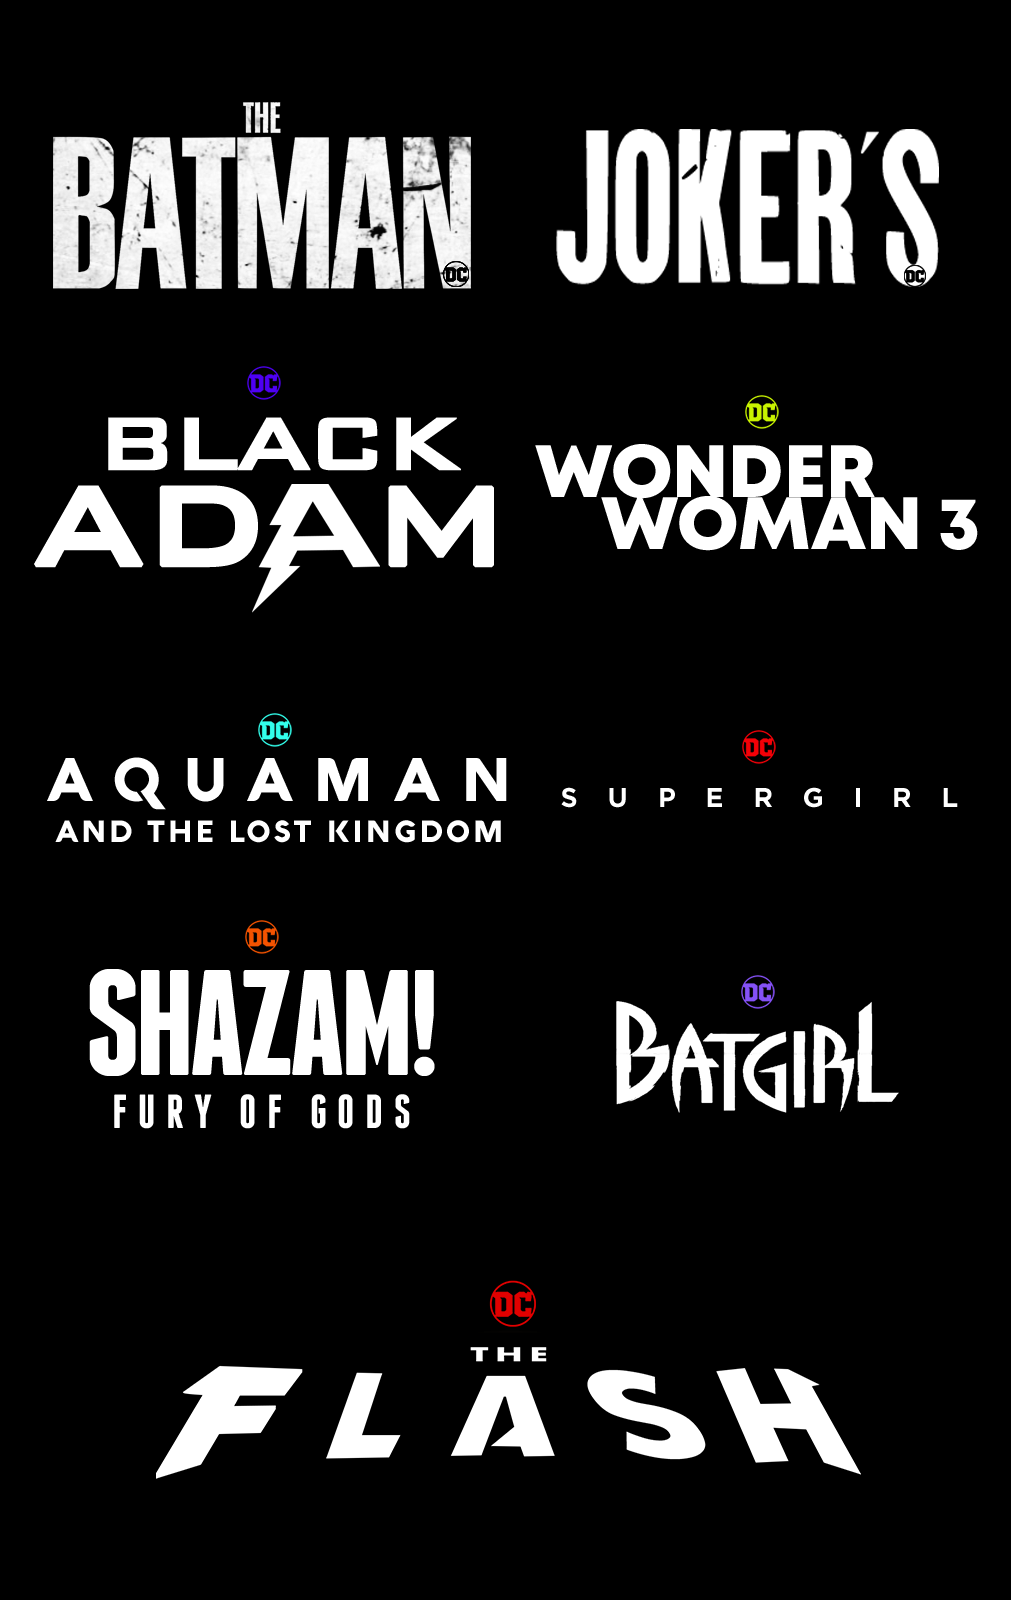 DC MOVIES LOGOS VECTOR PNG 20222024 by Andrewvm on DeviantArt